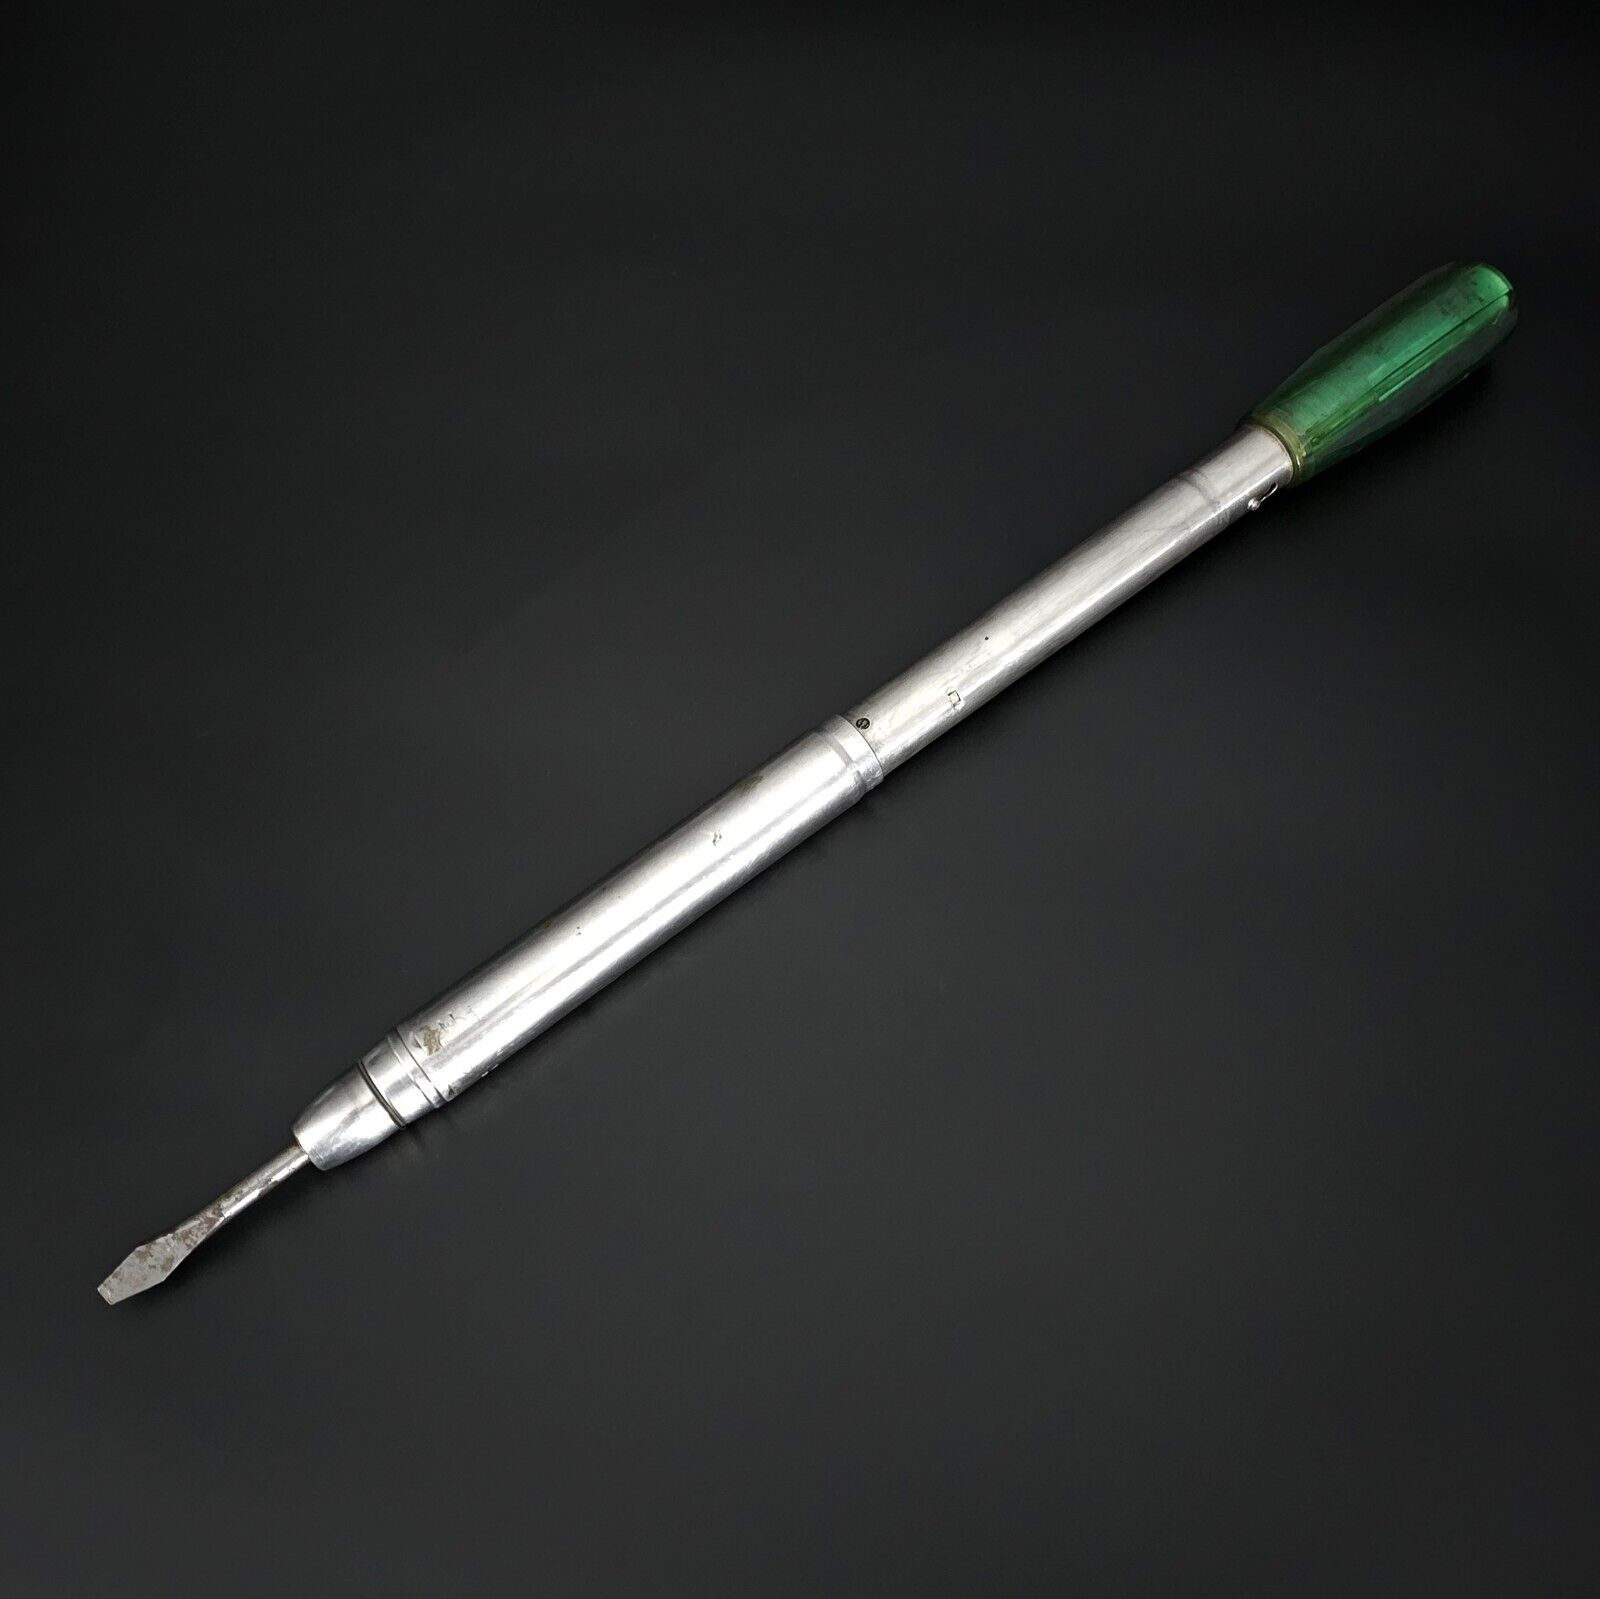 1953 Patented Greenlee No. 452 Concealed Stainless Ratchet Spiral Screwdriver